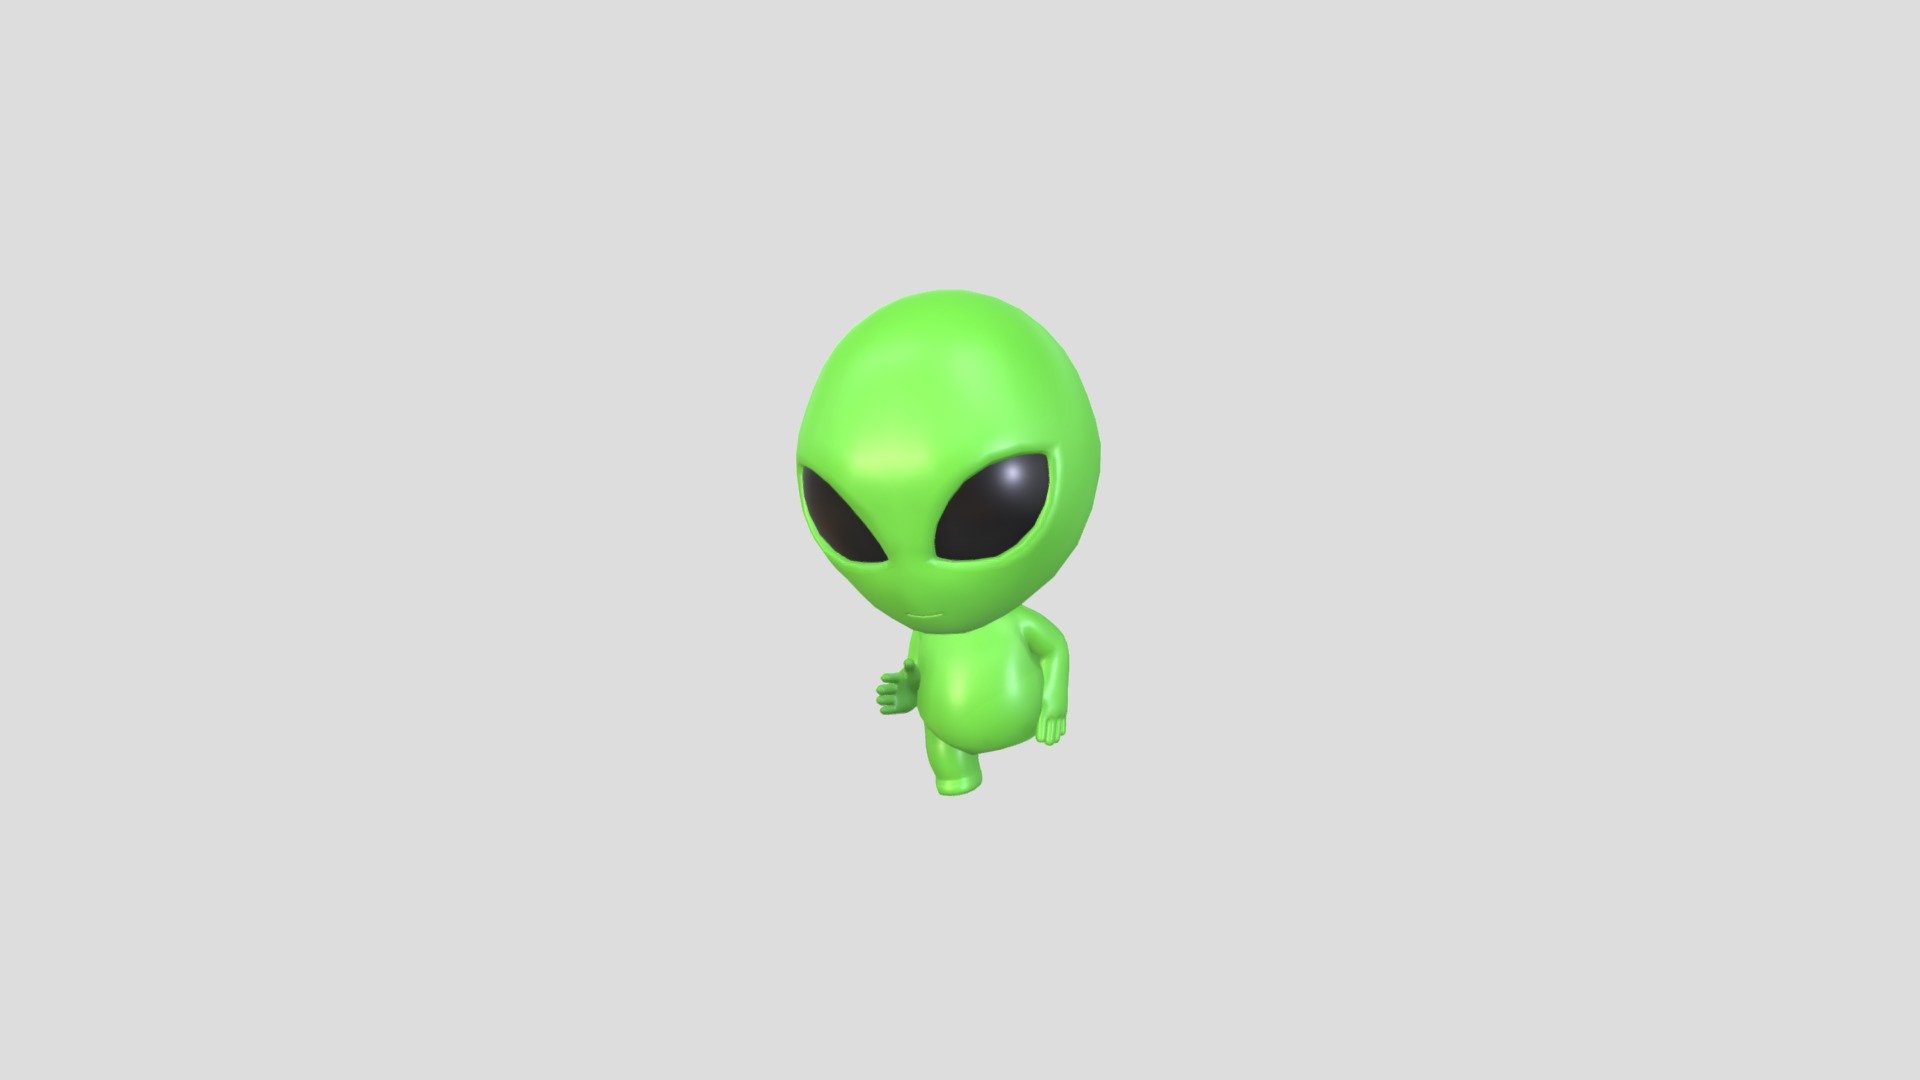 Rigged Alien 3d character model.      
    


File Format      
 
- 3ds max 2021  
 
- FBX  
 
- OBJ  
    


Clean topology    

Rig with CAT in 3ds Max                          

Bone and Weight skin are in fbx file                 

No Facial Rig               

No Animation               

Non-overlapping unwrapped UVs        
 


PNG texture               

2048x2048                


- Base Color                        

- Roughness                         



3,116 polygons                          

3,170 vertexs                          
 - Character171 Rigged Alien - Buy Royalty Free 3D model by BaluCG 3d model